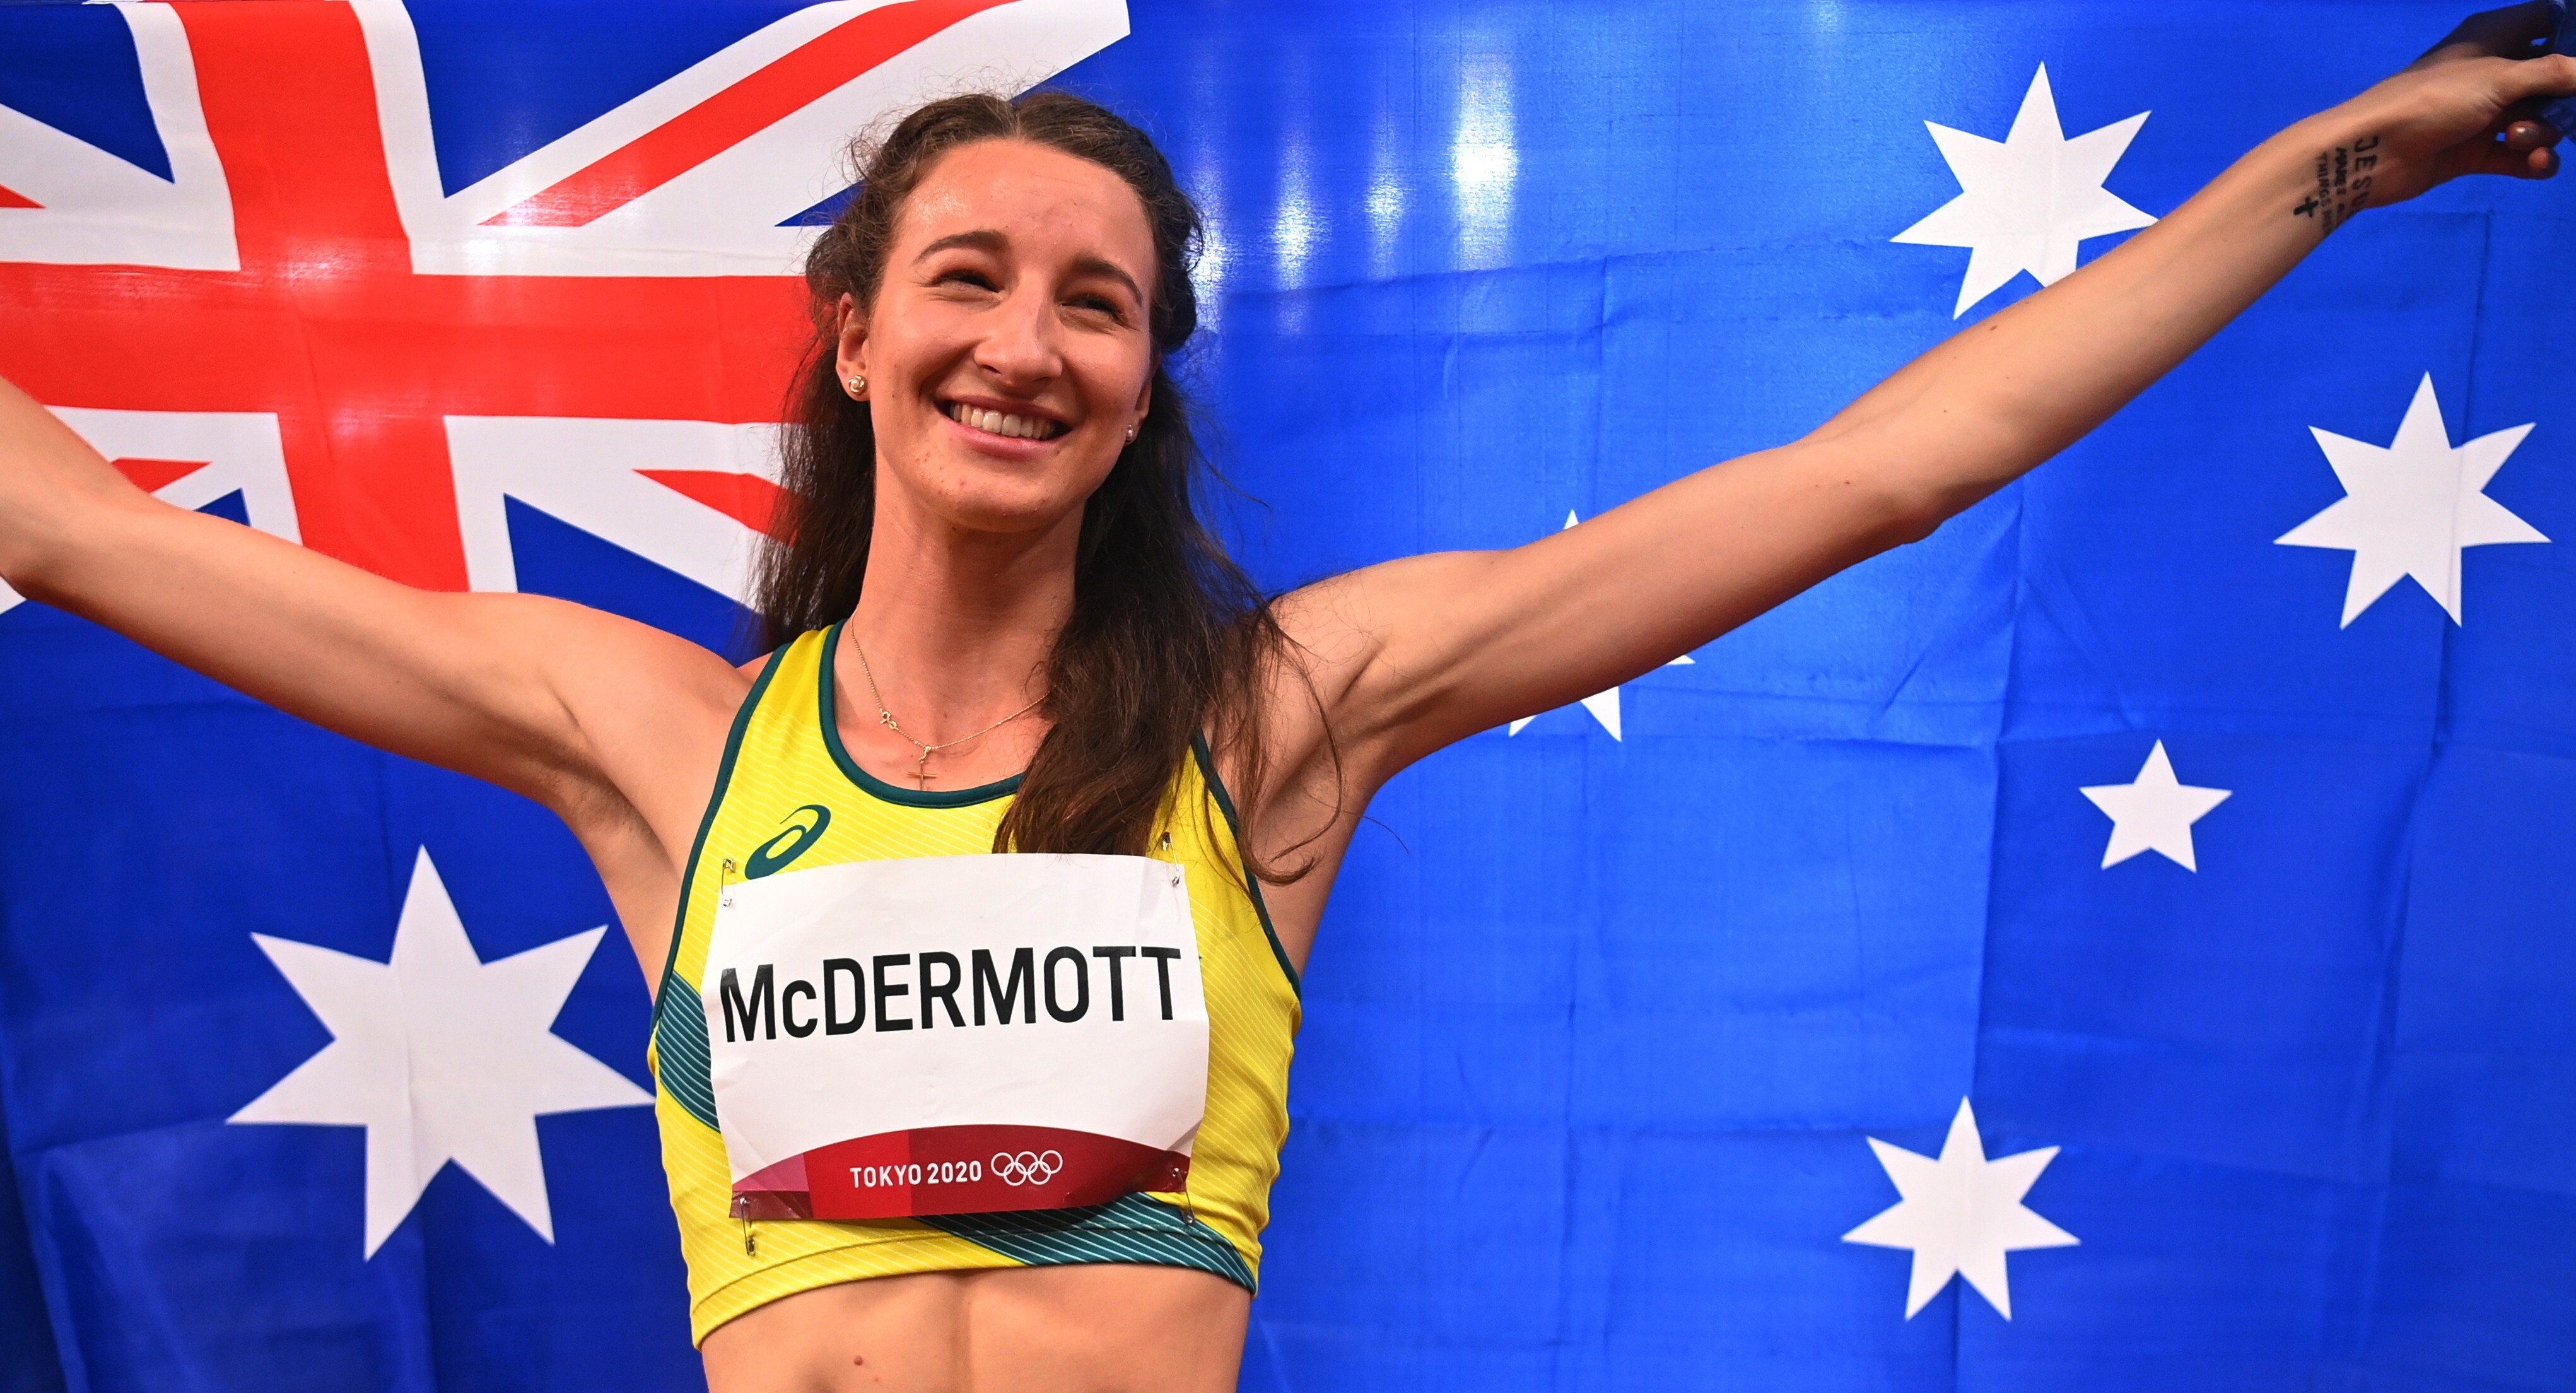 Nicola McDermott won a silver medal for Australia in the women’s high jump. Photo: Reuters